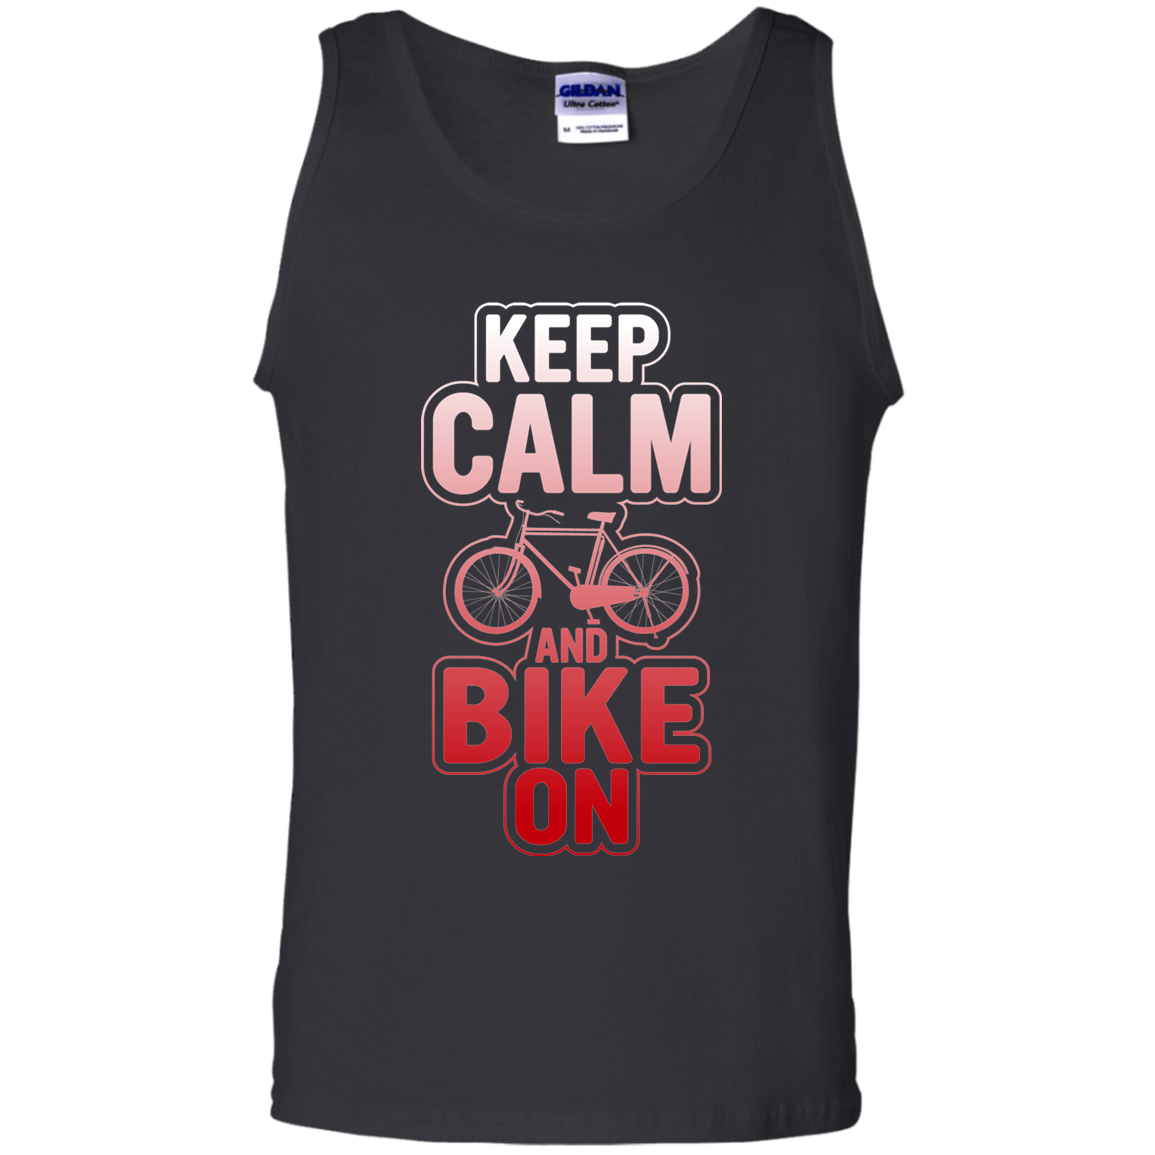 Check Out This Awesome Keep Calm And Bike On Biking Bmx Riding Bicycle T Shirt Tank Top